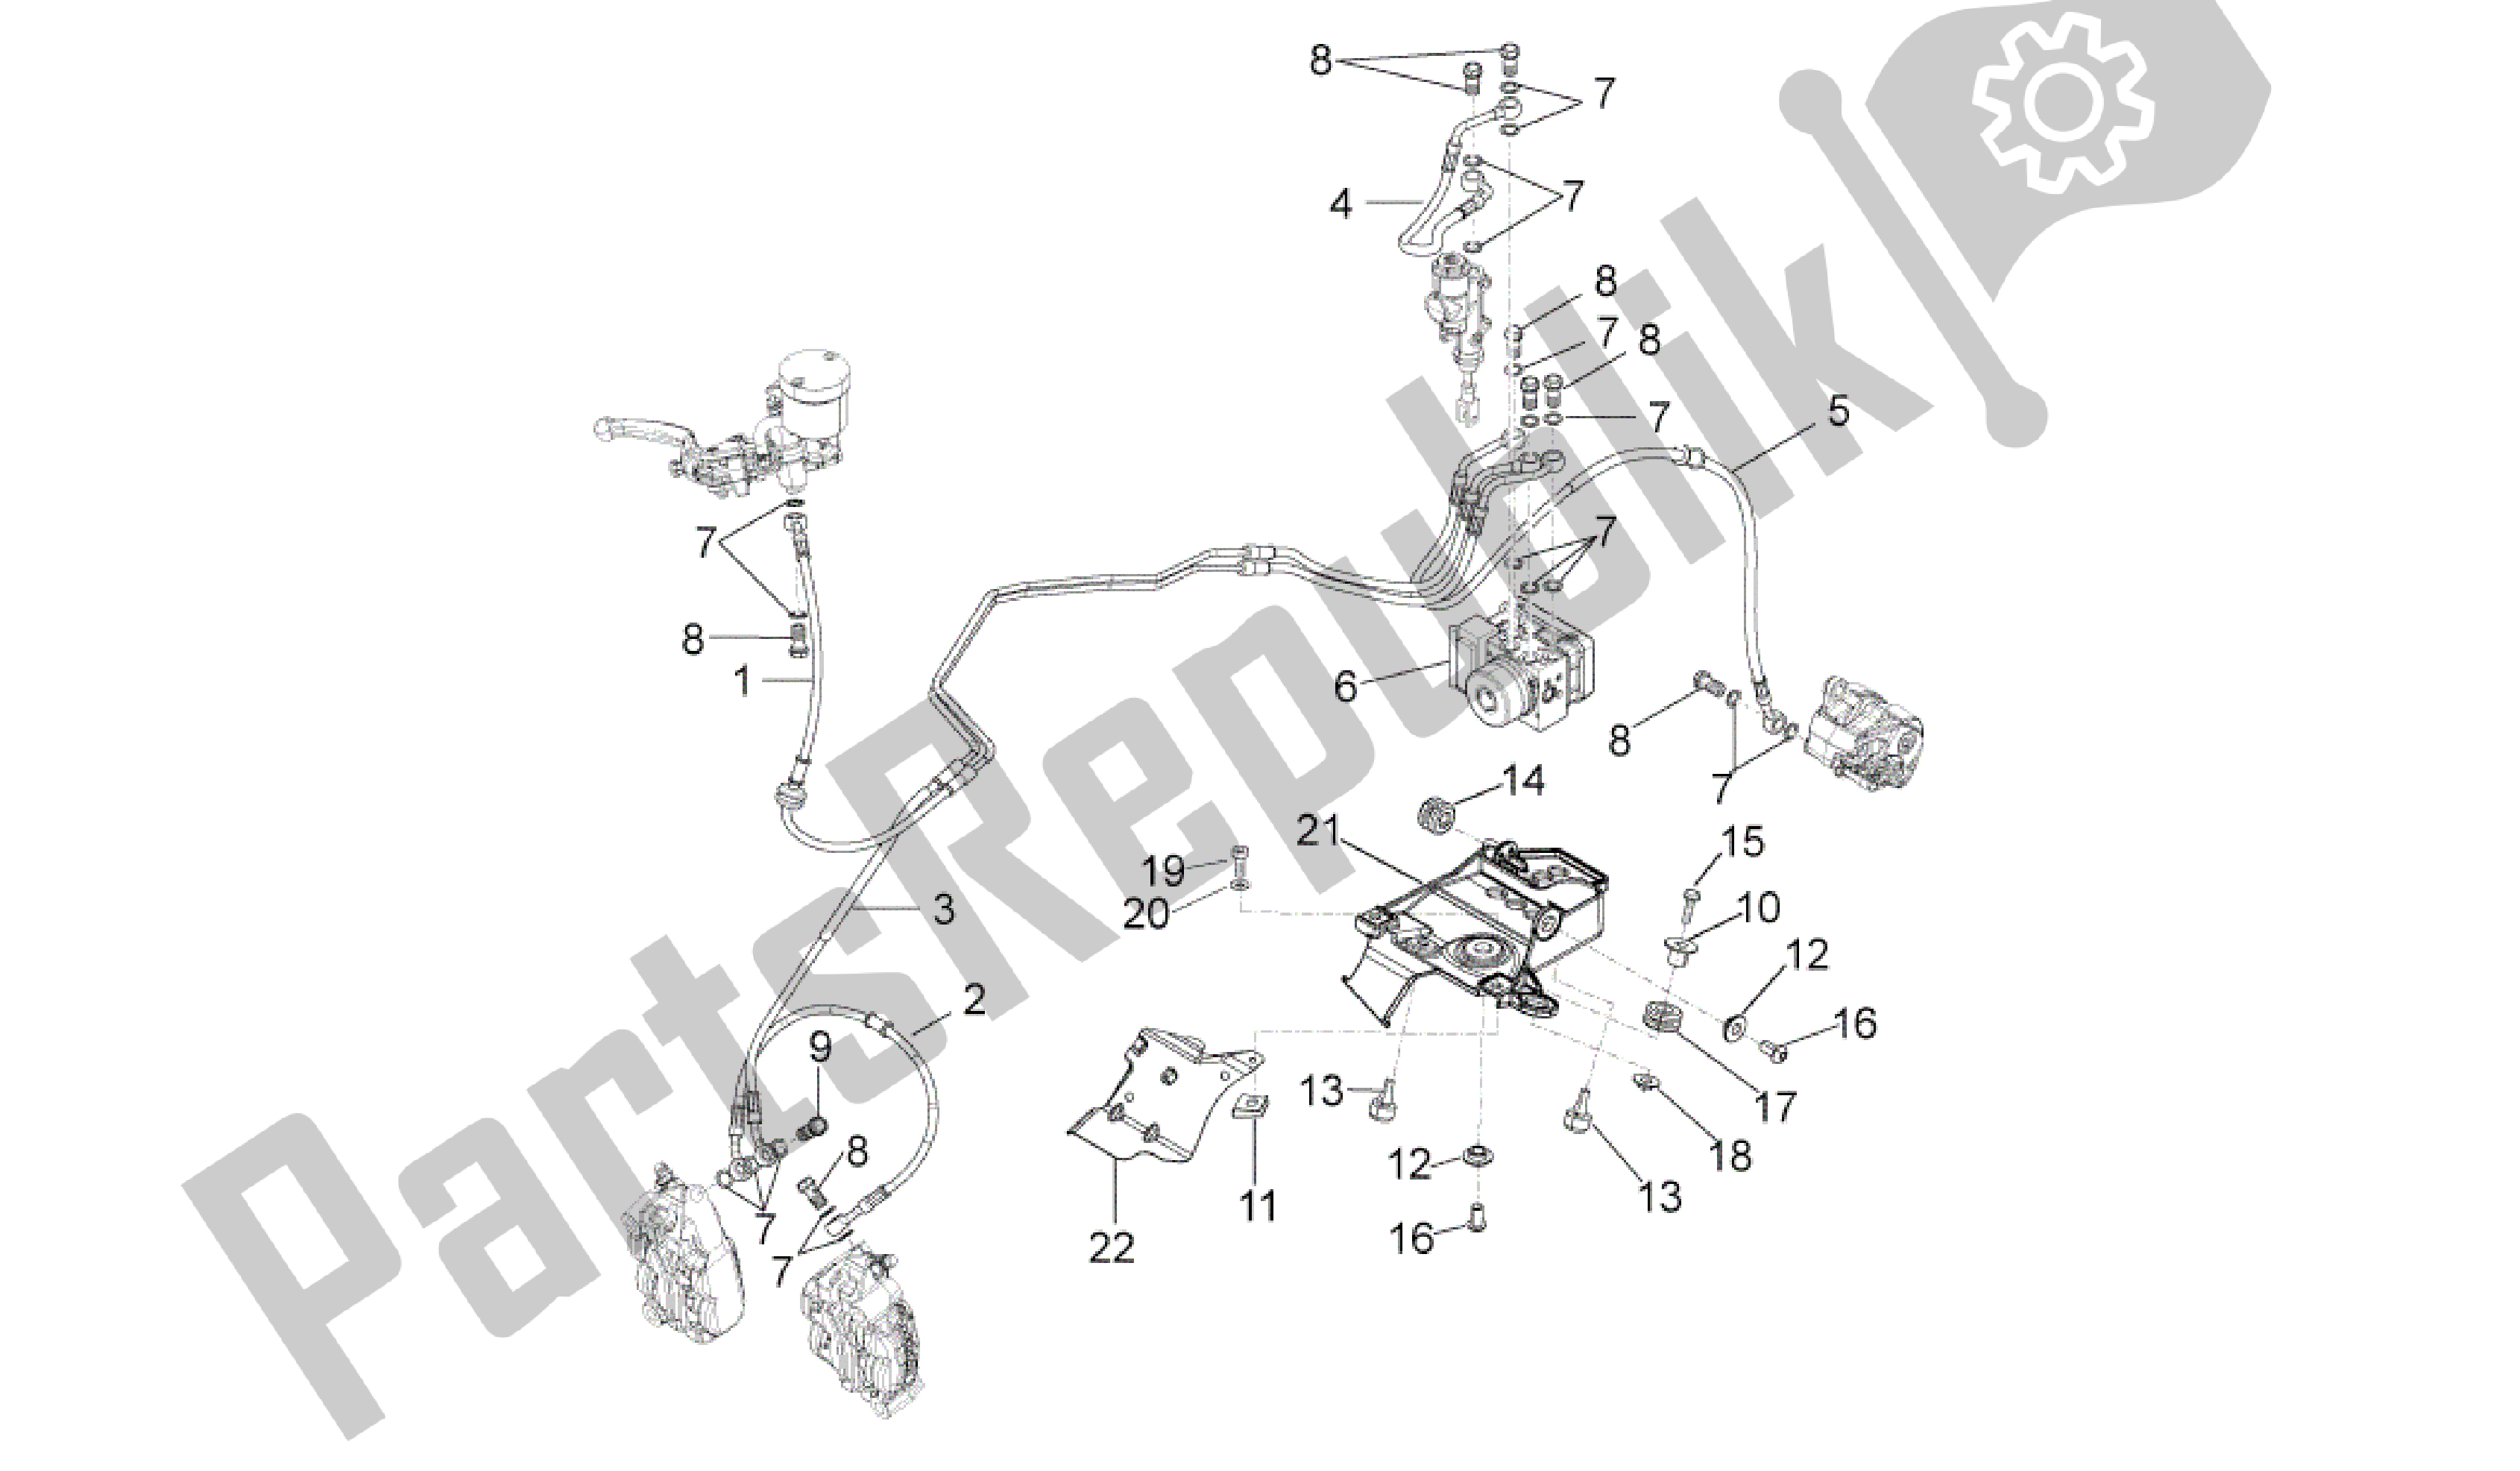 All parts for the Abs Brake System of the Aprilia RSV4 Aprc Factory ABS 3986 1000 2013